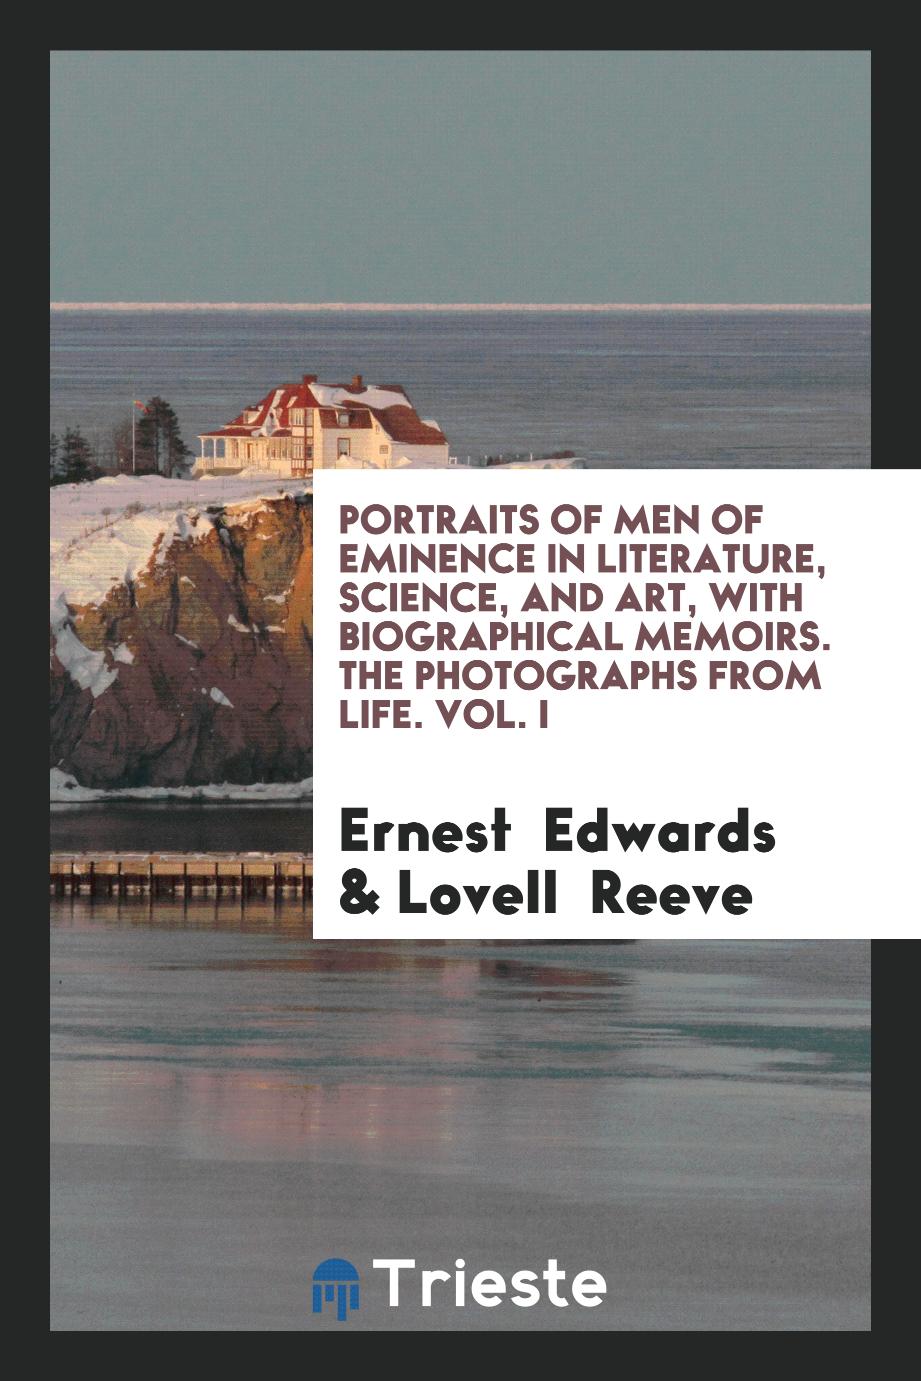 Portraits of Men of Eminence in Literature, Science, and Art, with Biographical Memoirs. The Photographs from Life. Vol. I